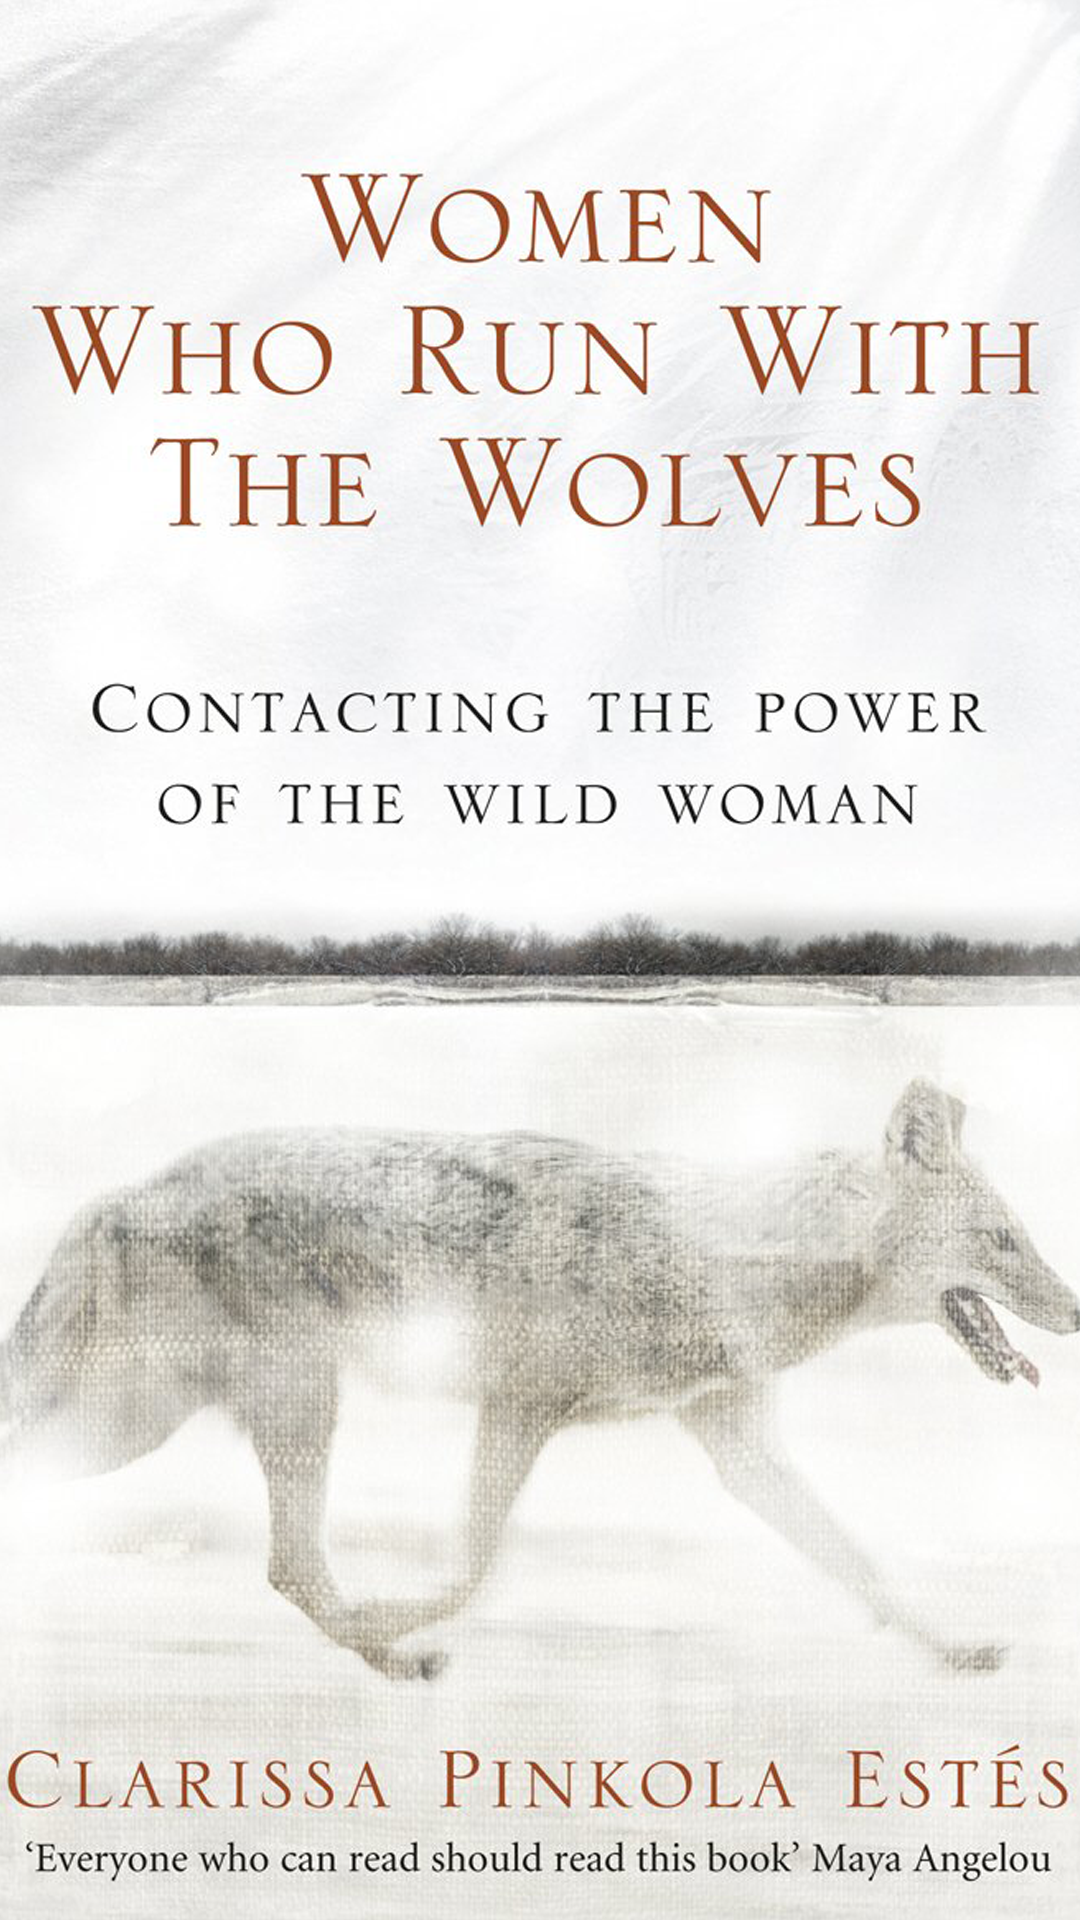 'Women who run with the Wolves' book cover